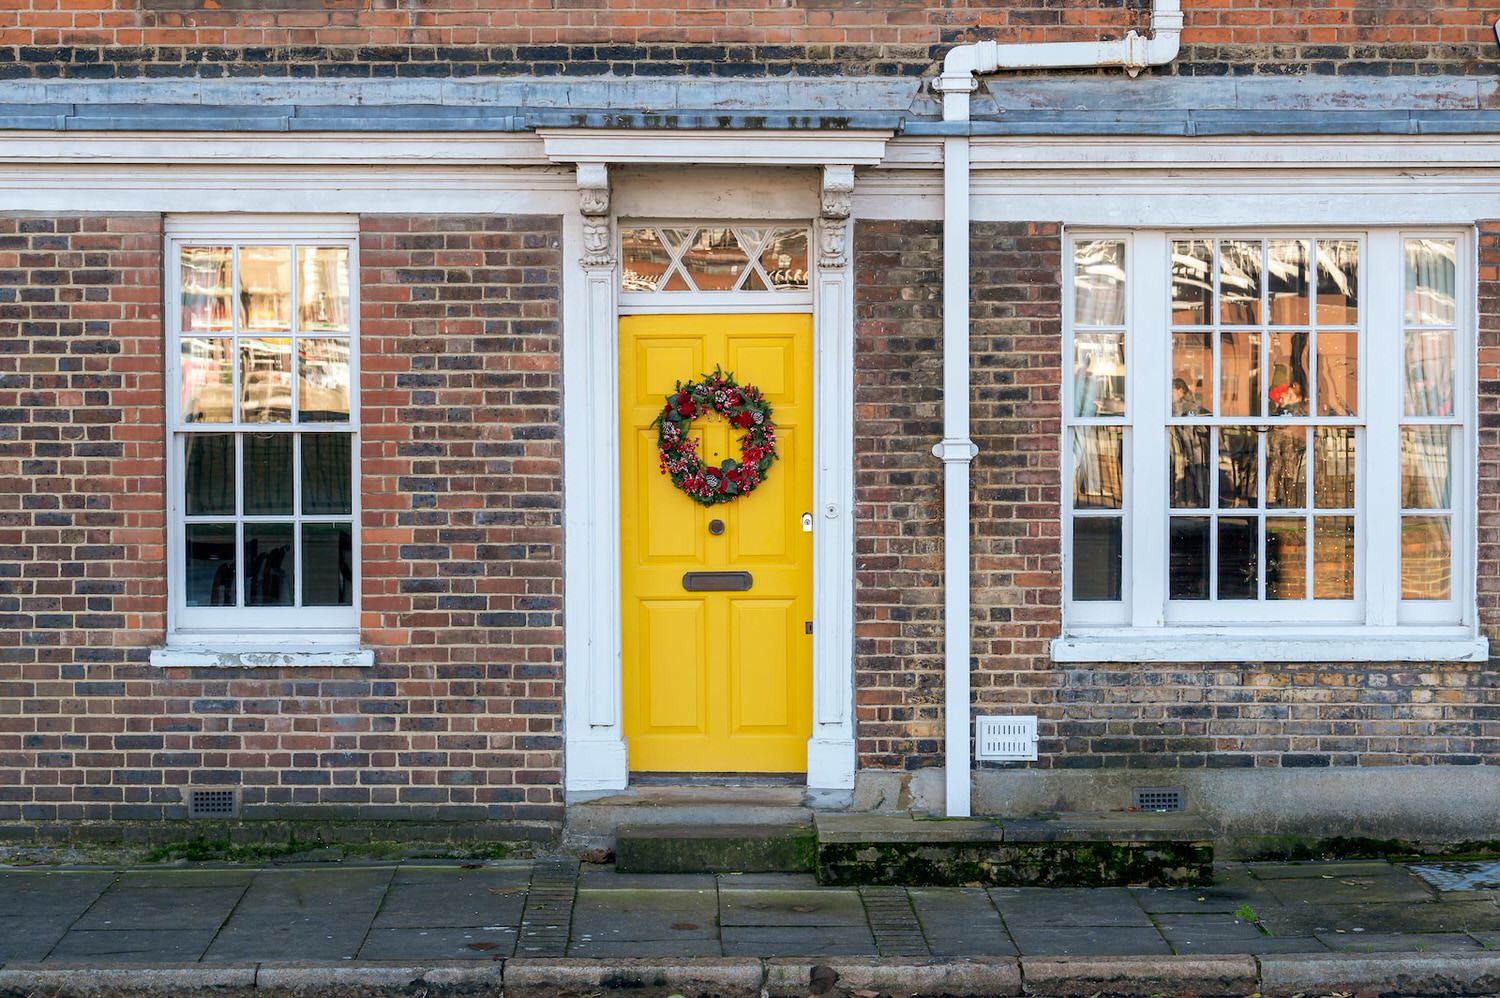 a yellow door with a wreath on it in front of a brick building